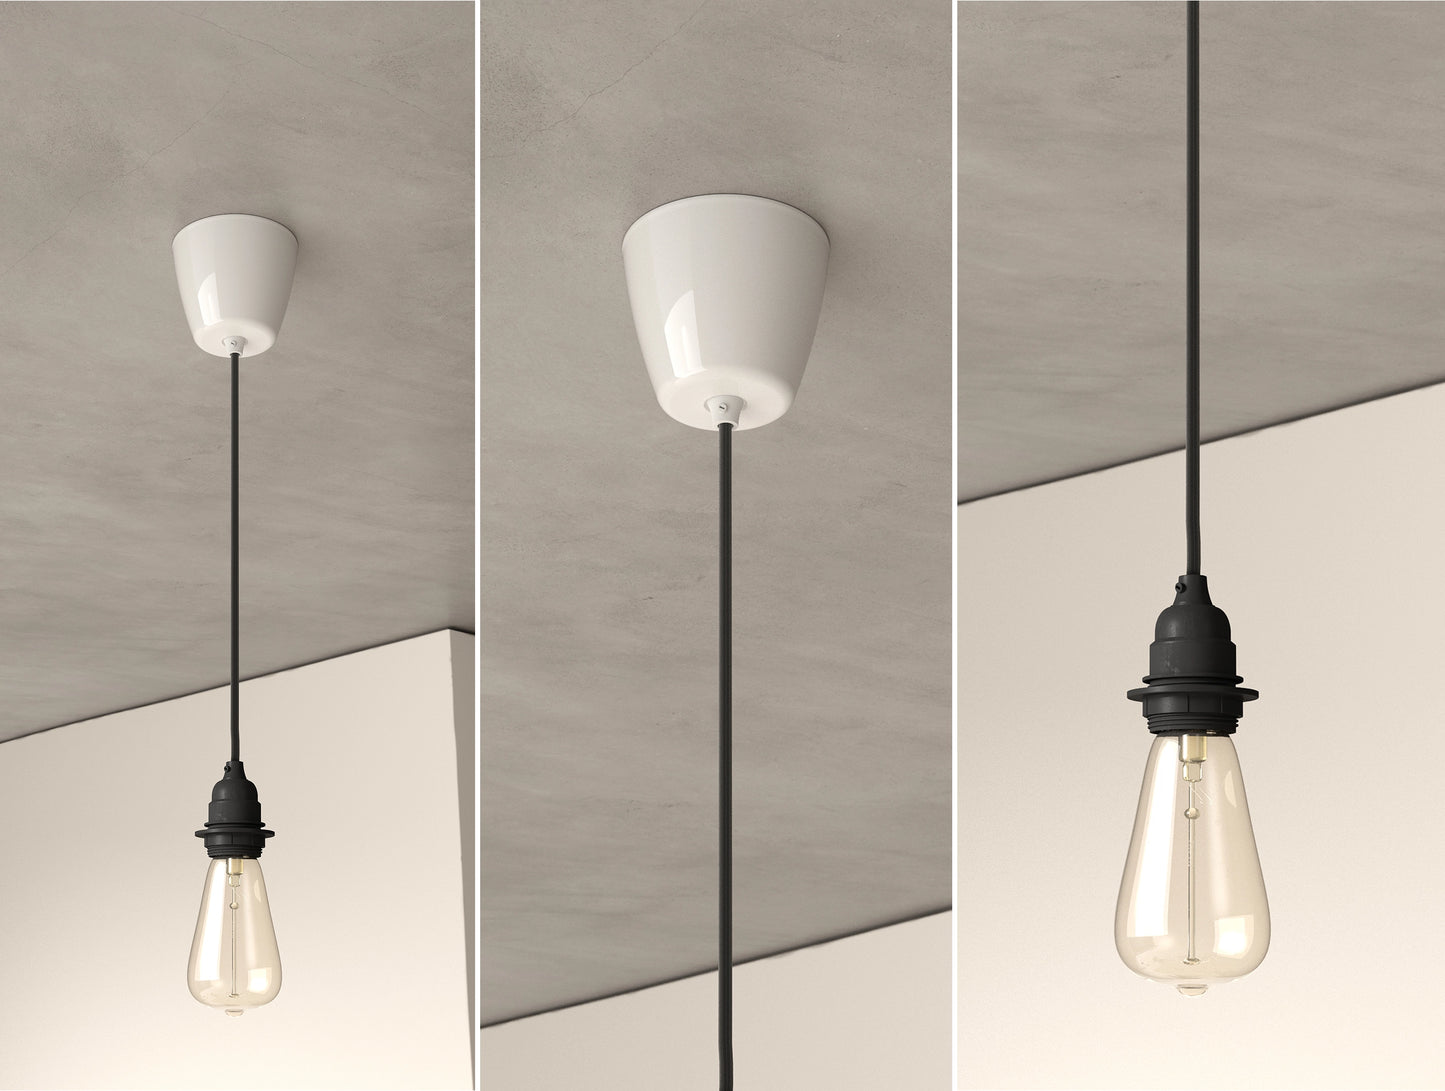 An E27 Industrial Coolicon pendant set with a Vitreous Enamel ceiling cup and an E27 lightbulb hanging from a concrete ceiling